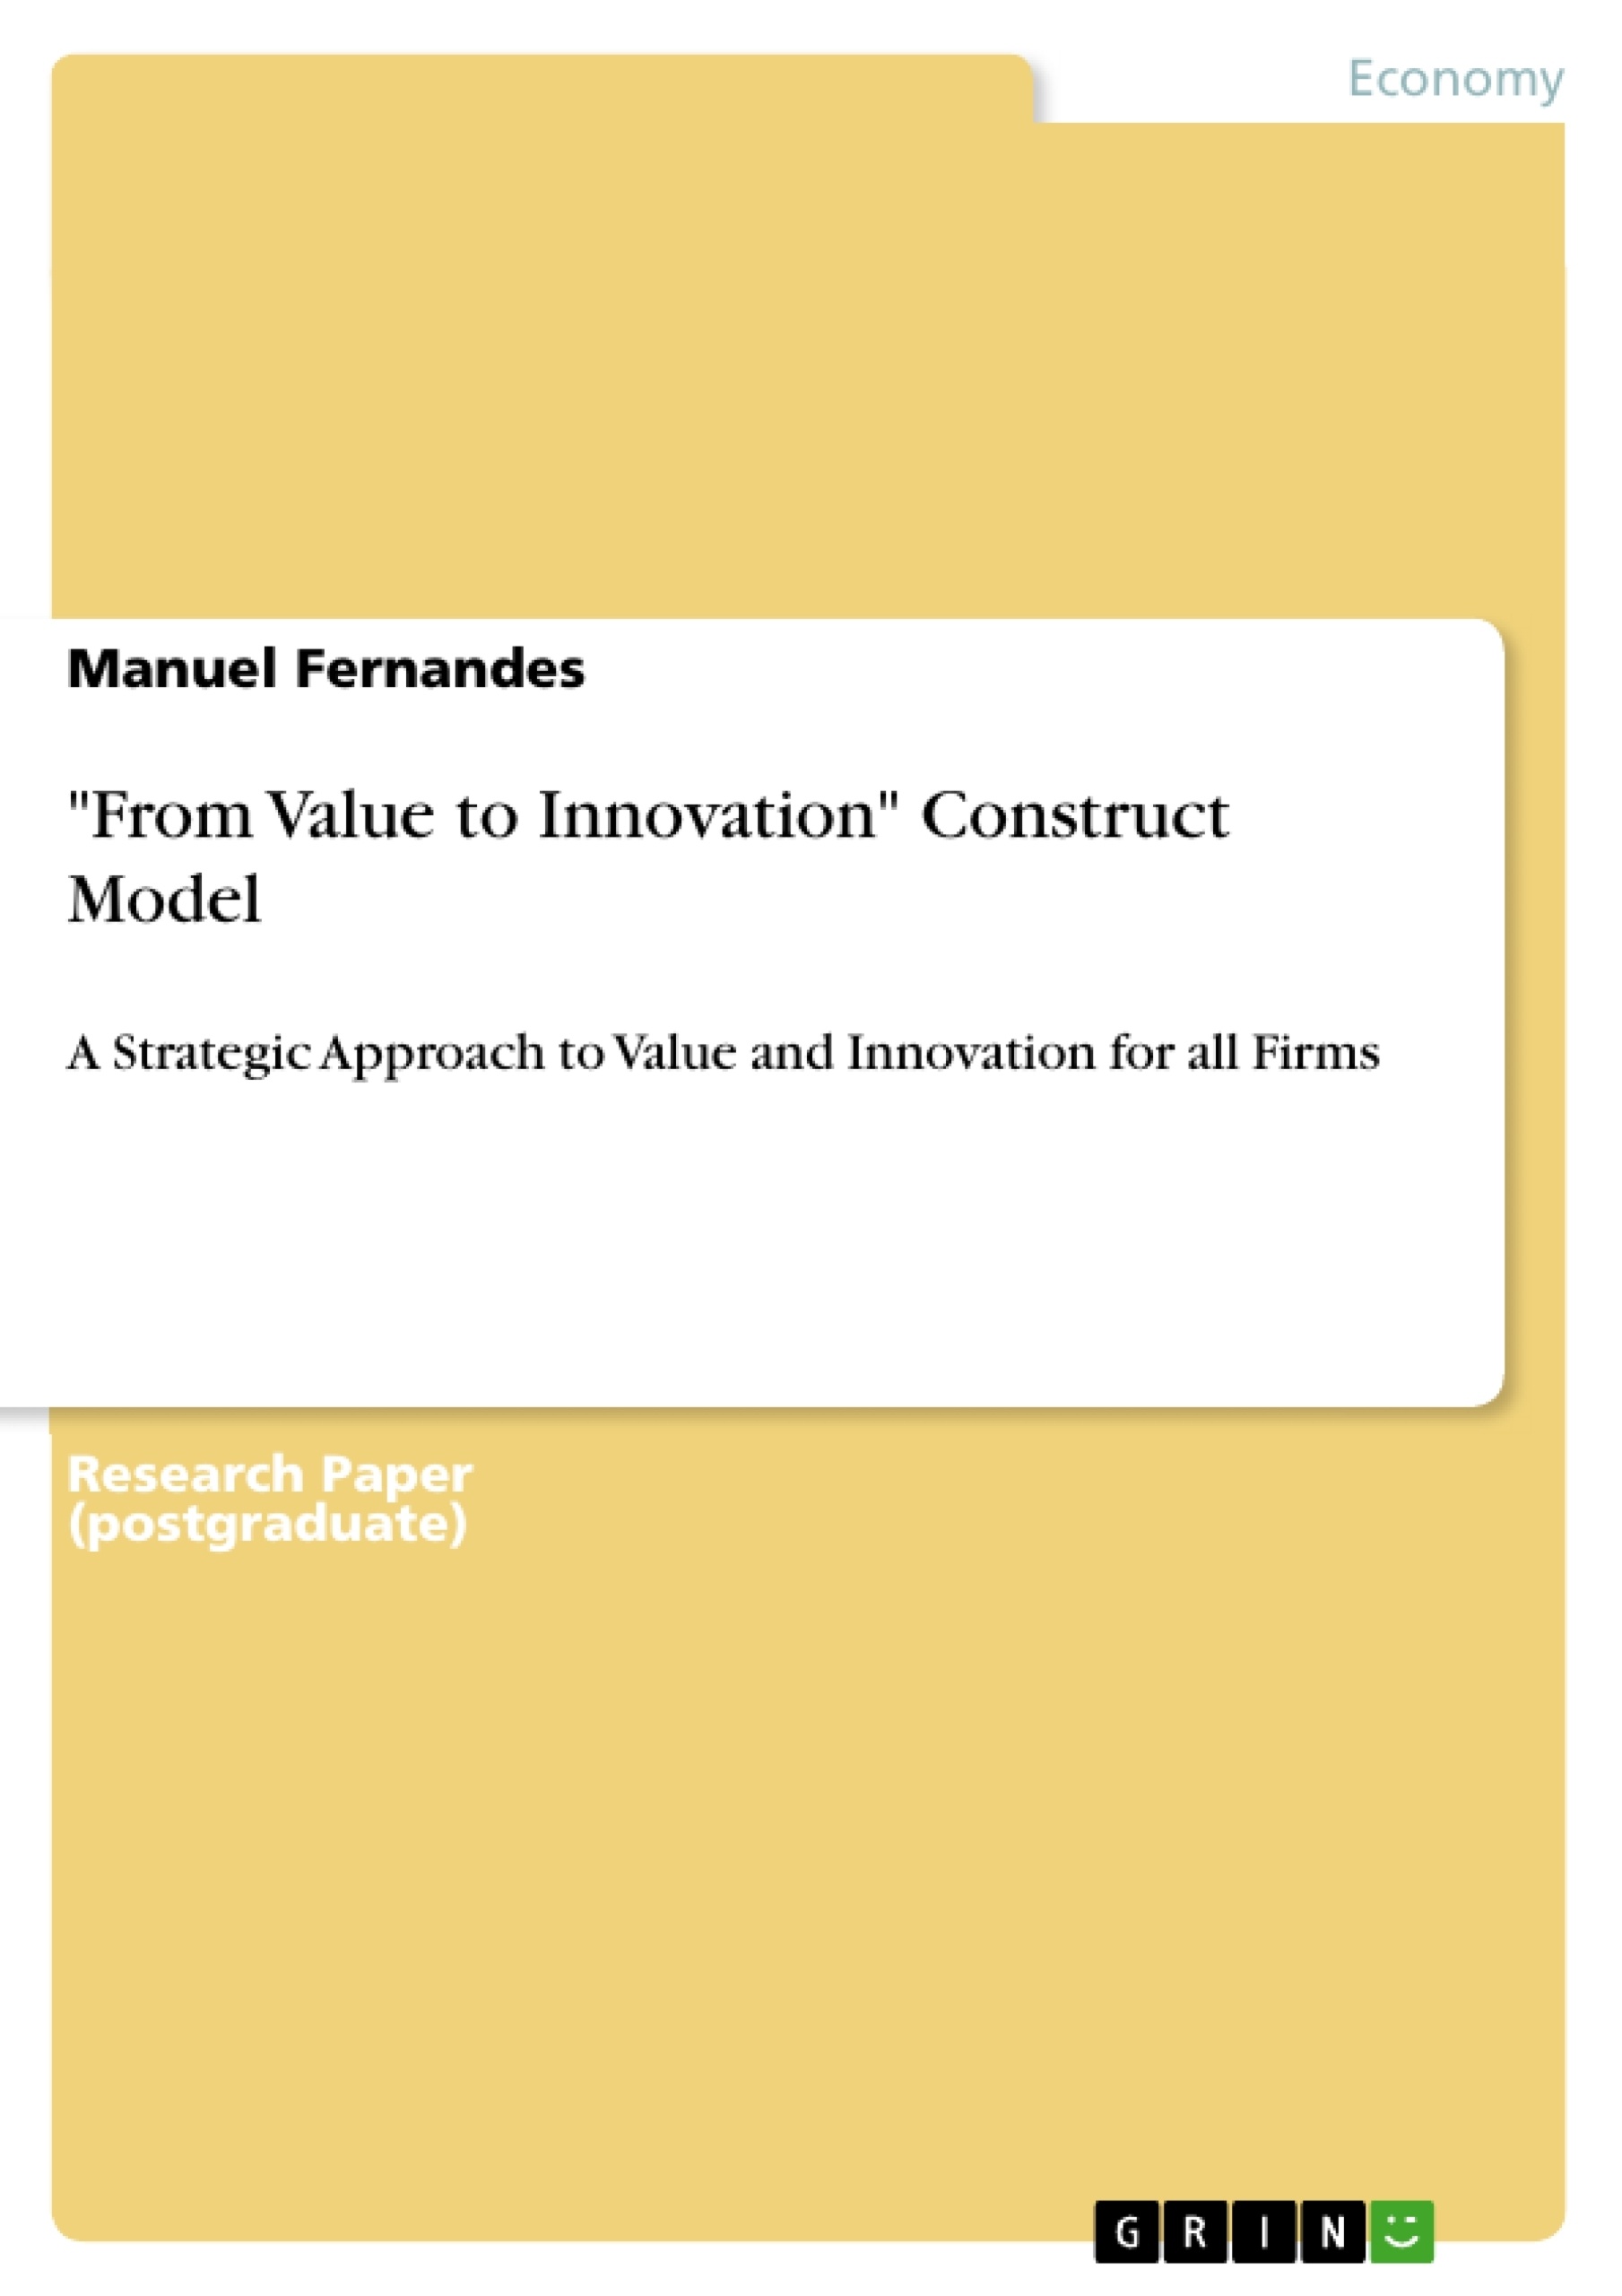 Titre: "From Value to Innovation" Construct Model